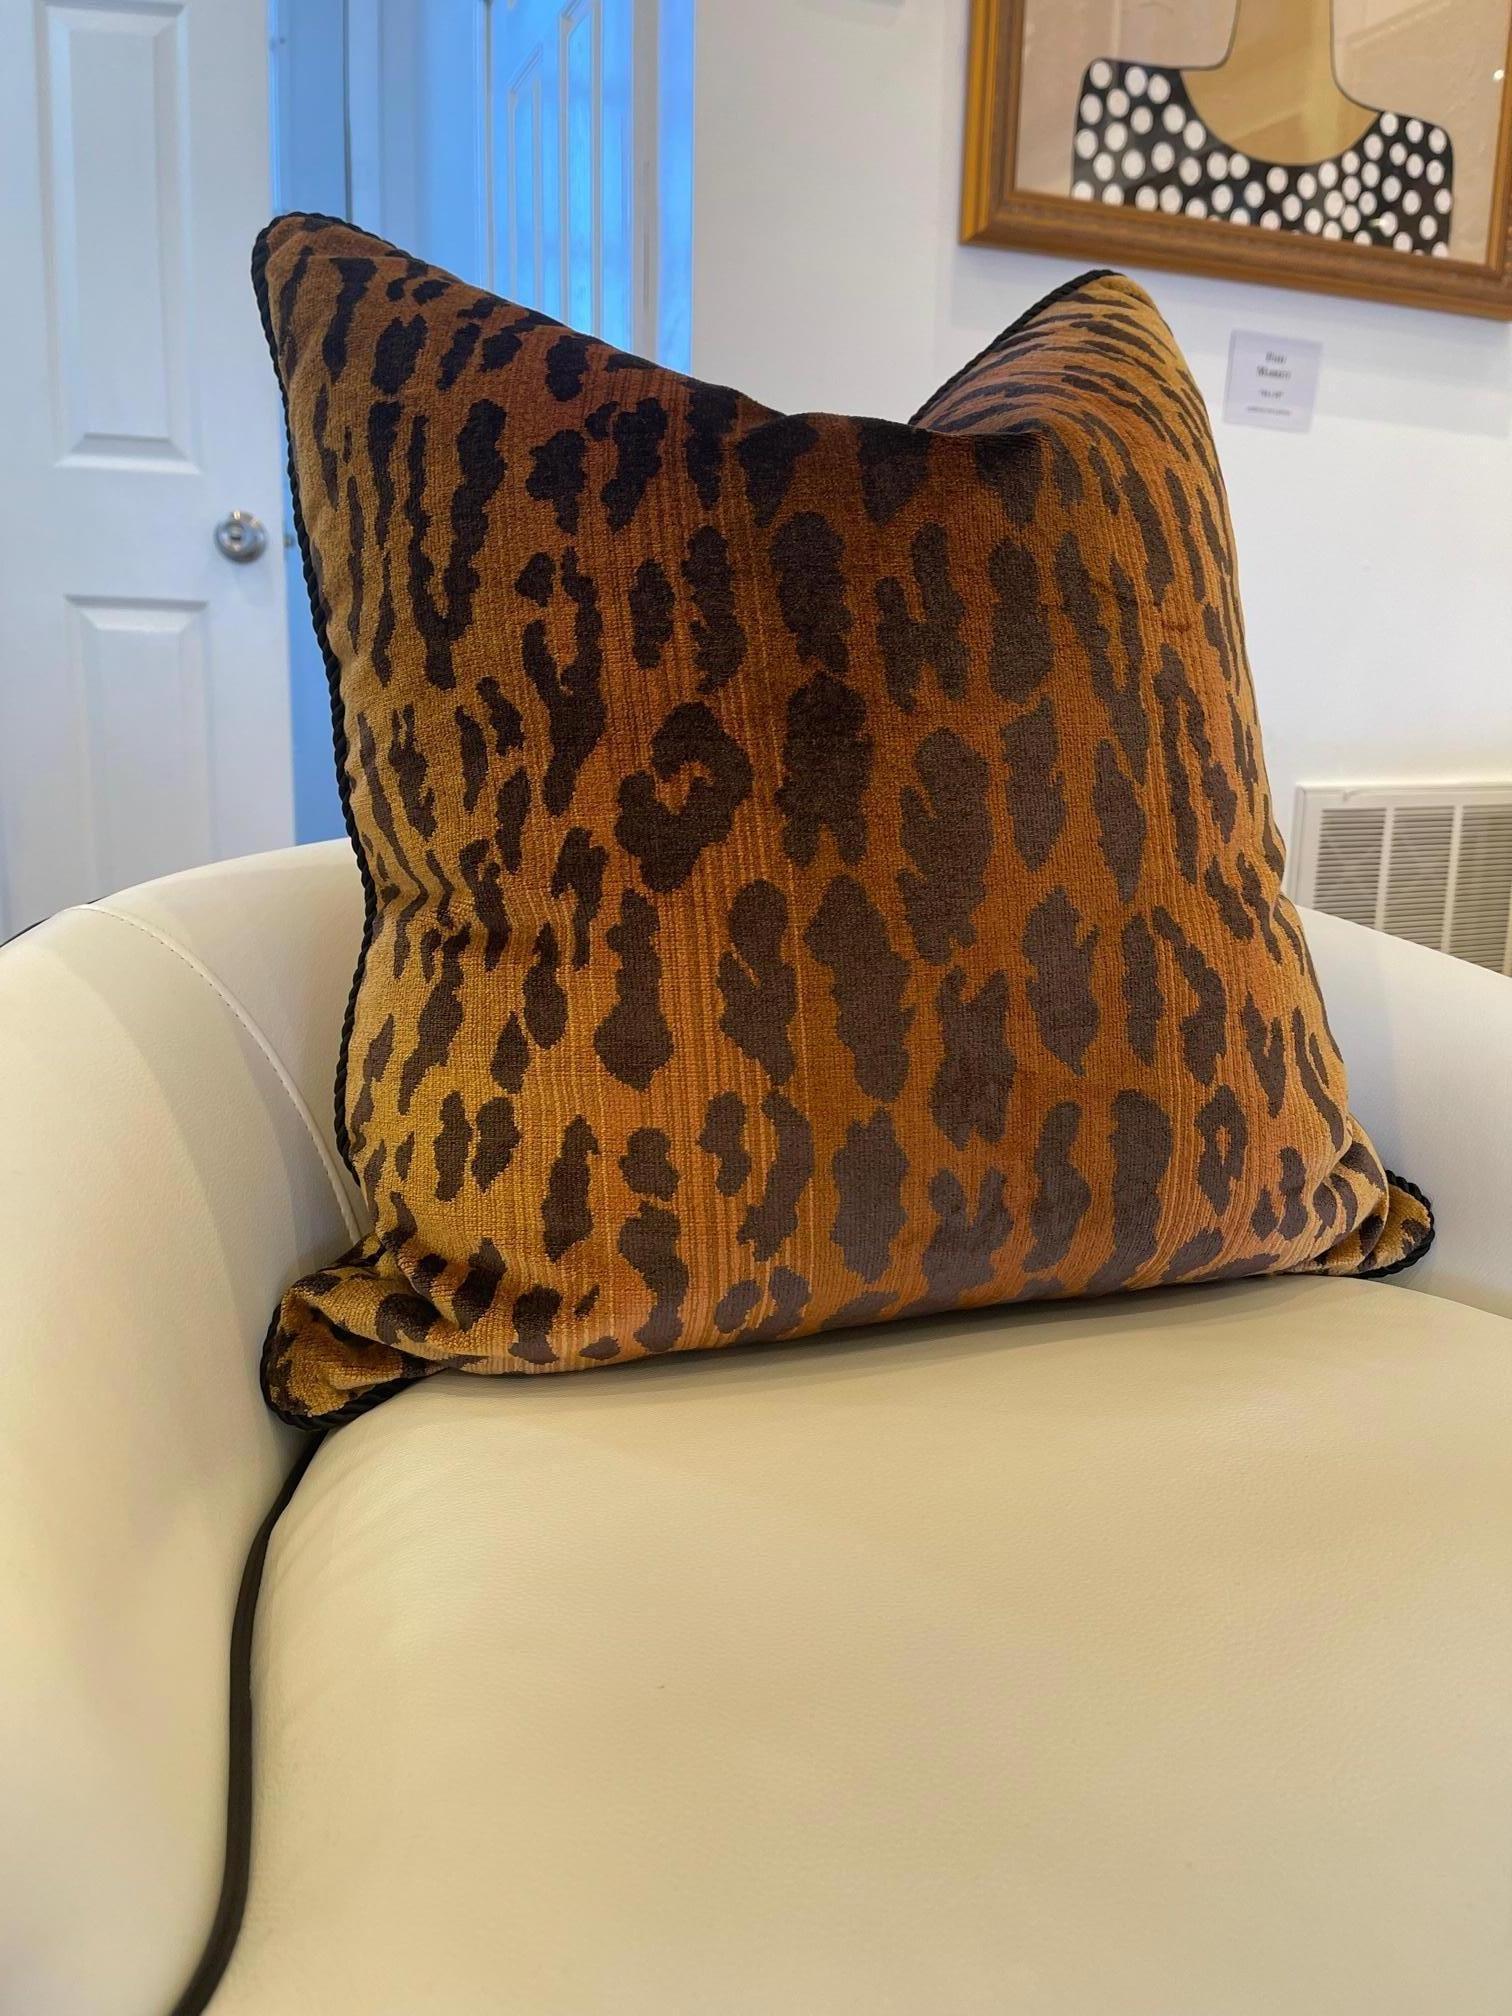 American House of Scalamandre Leopard Luxury Pillow For Sale